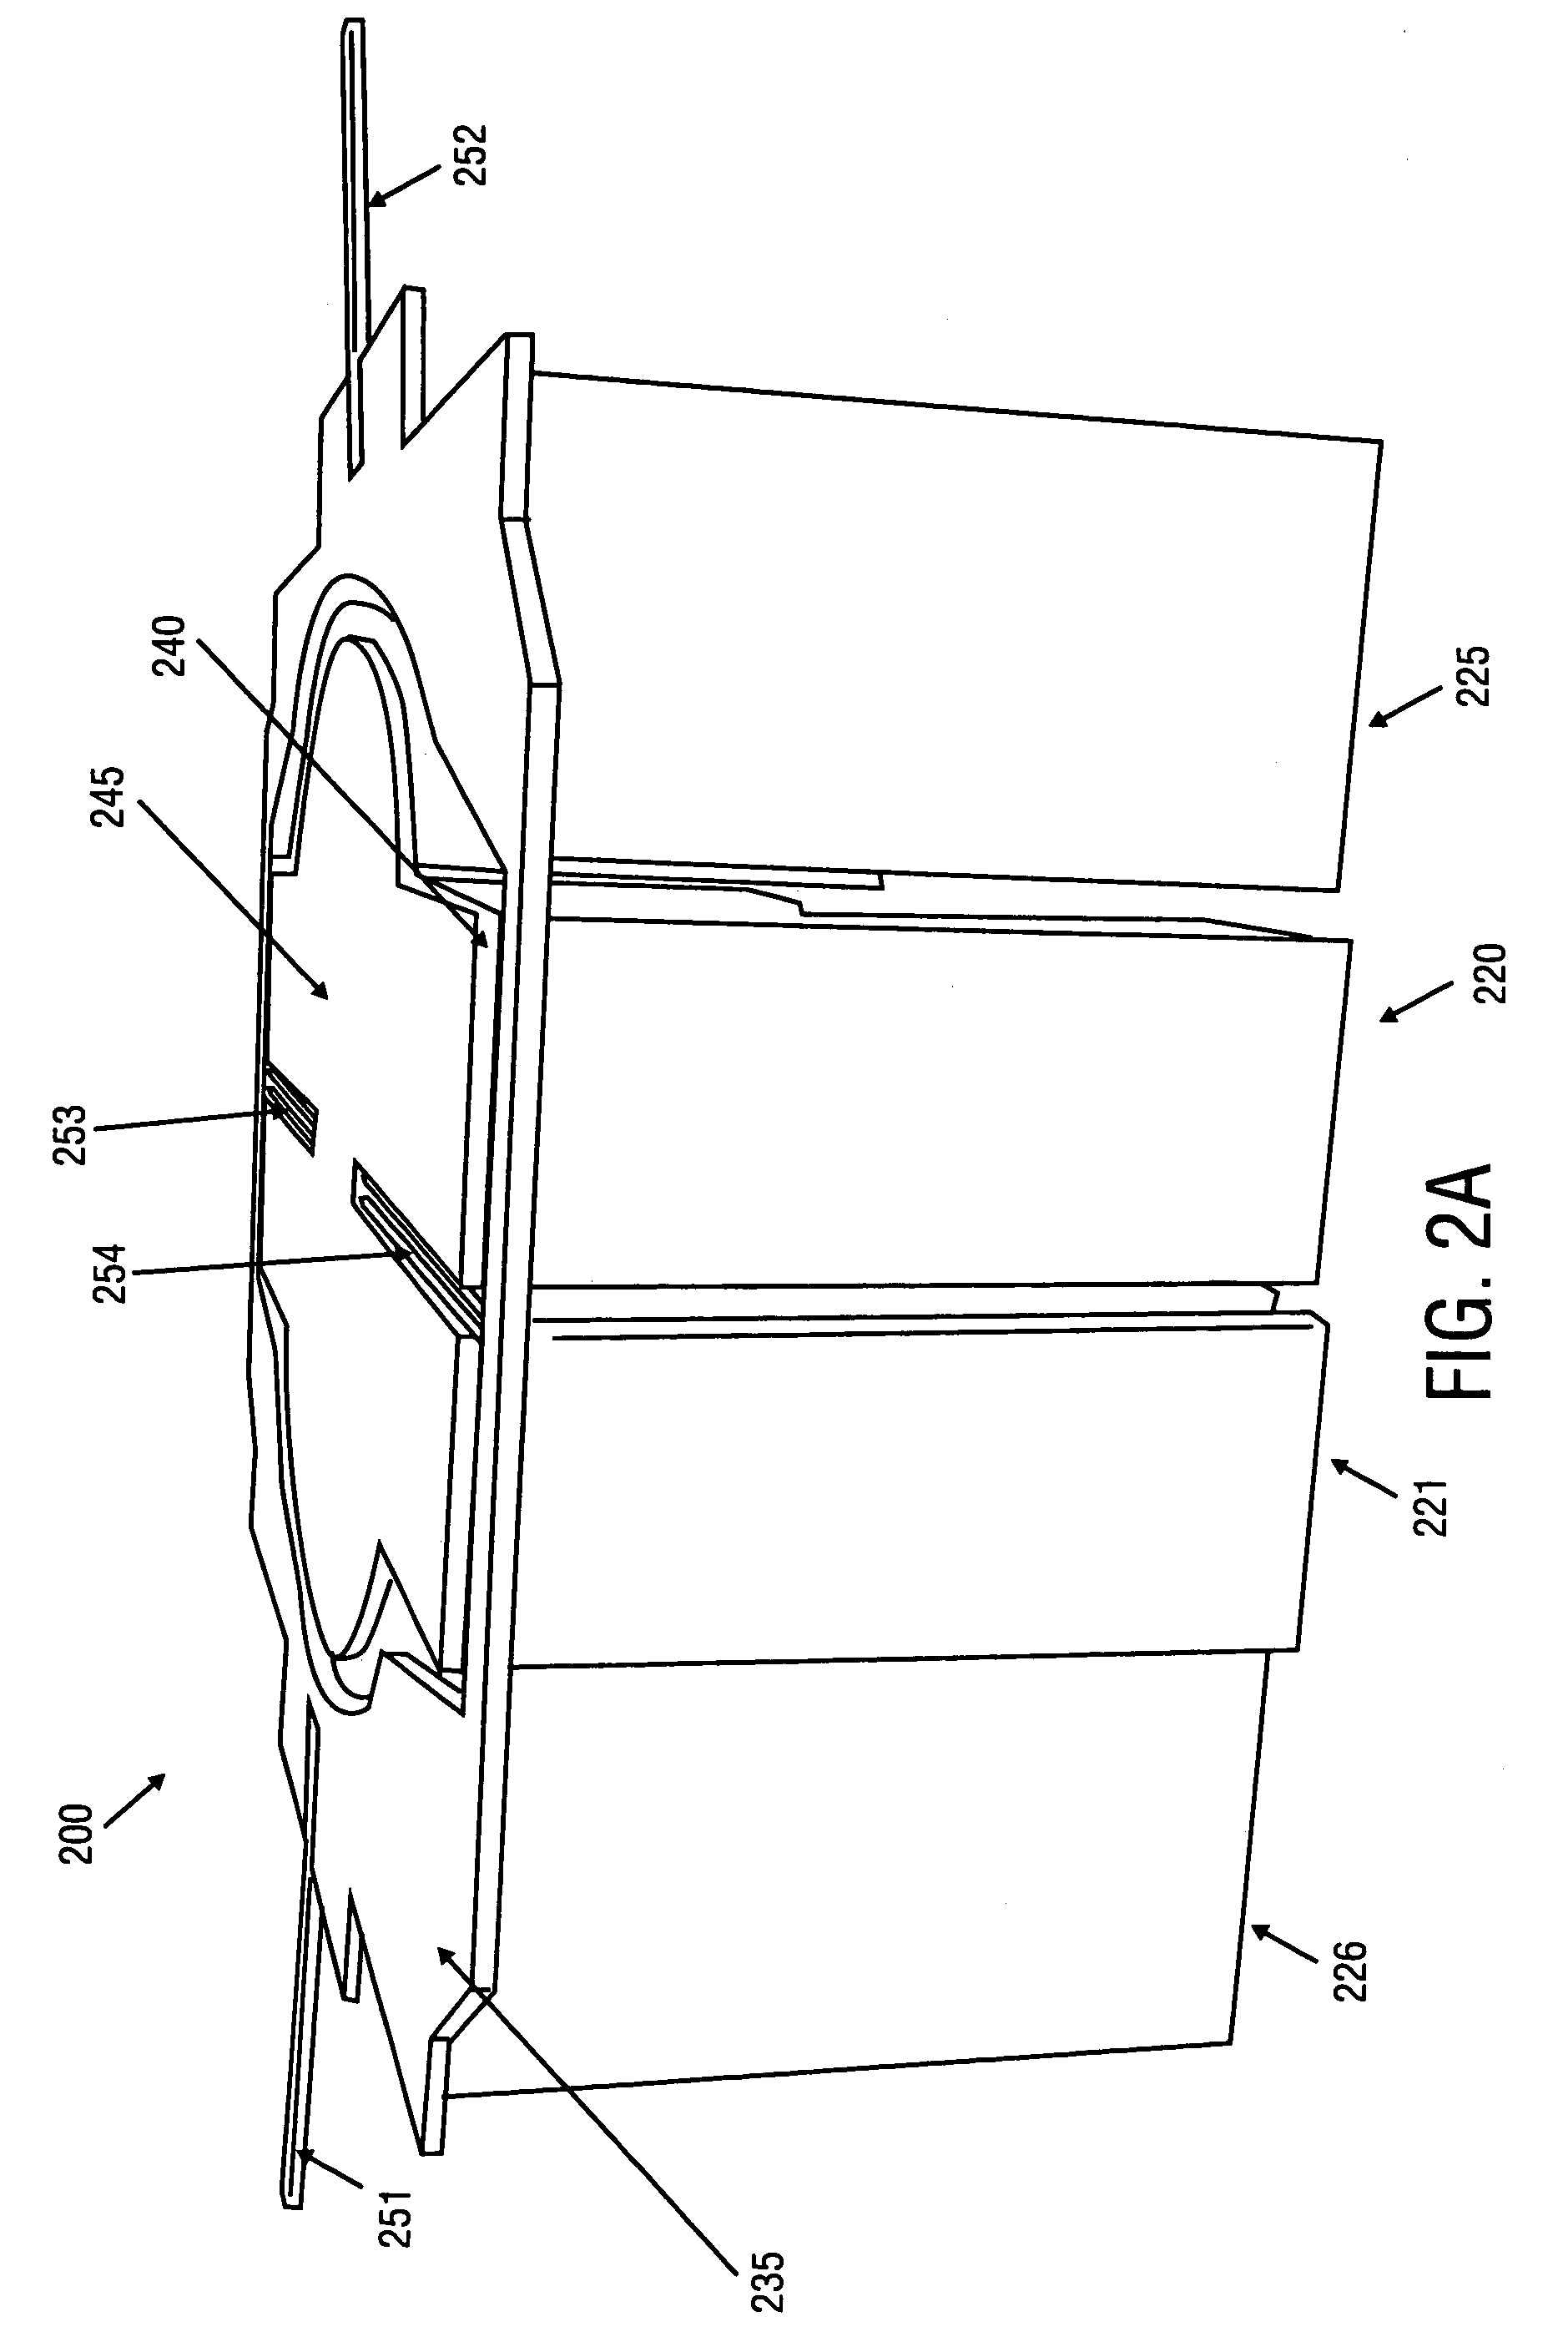 Electrostatic actuator for microelectromechanical systems and methods of fabrication